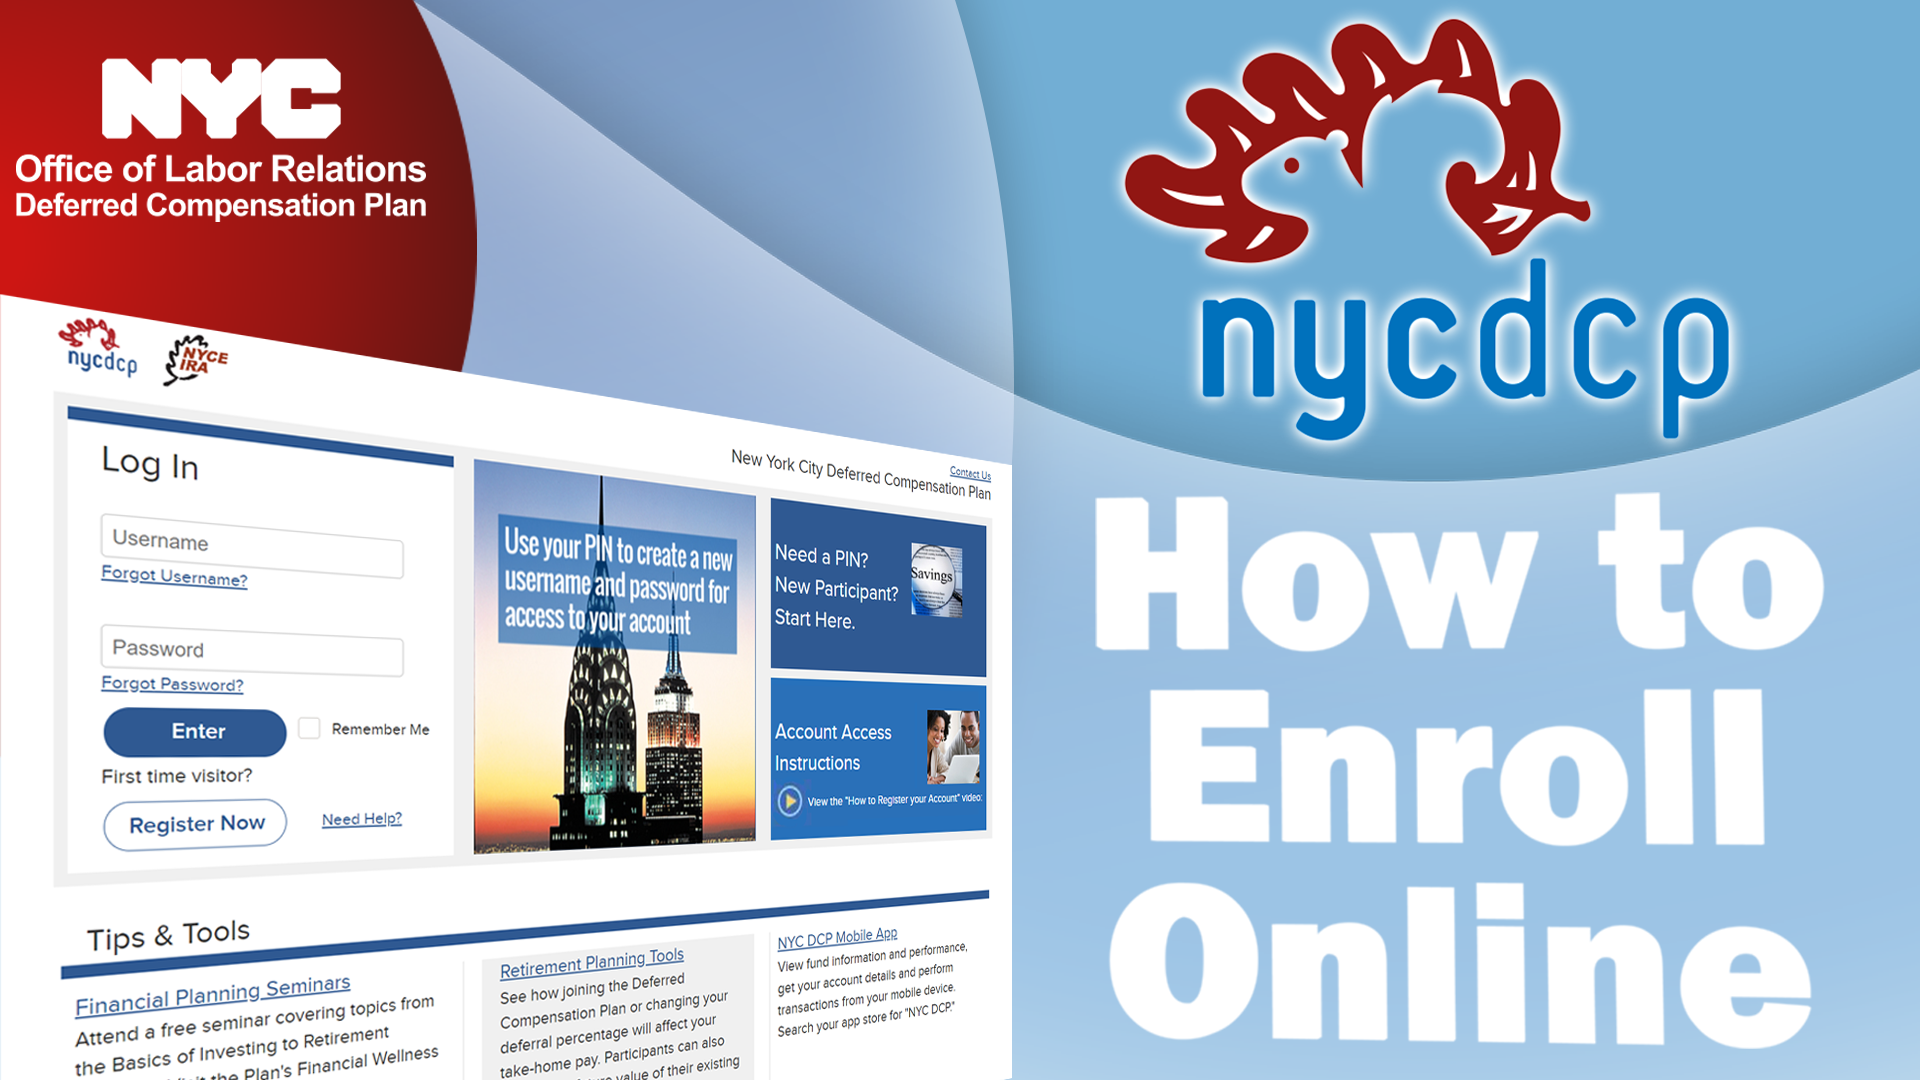 How to Enroll Online